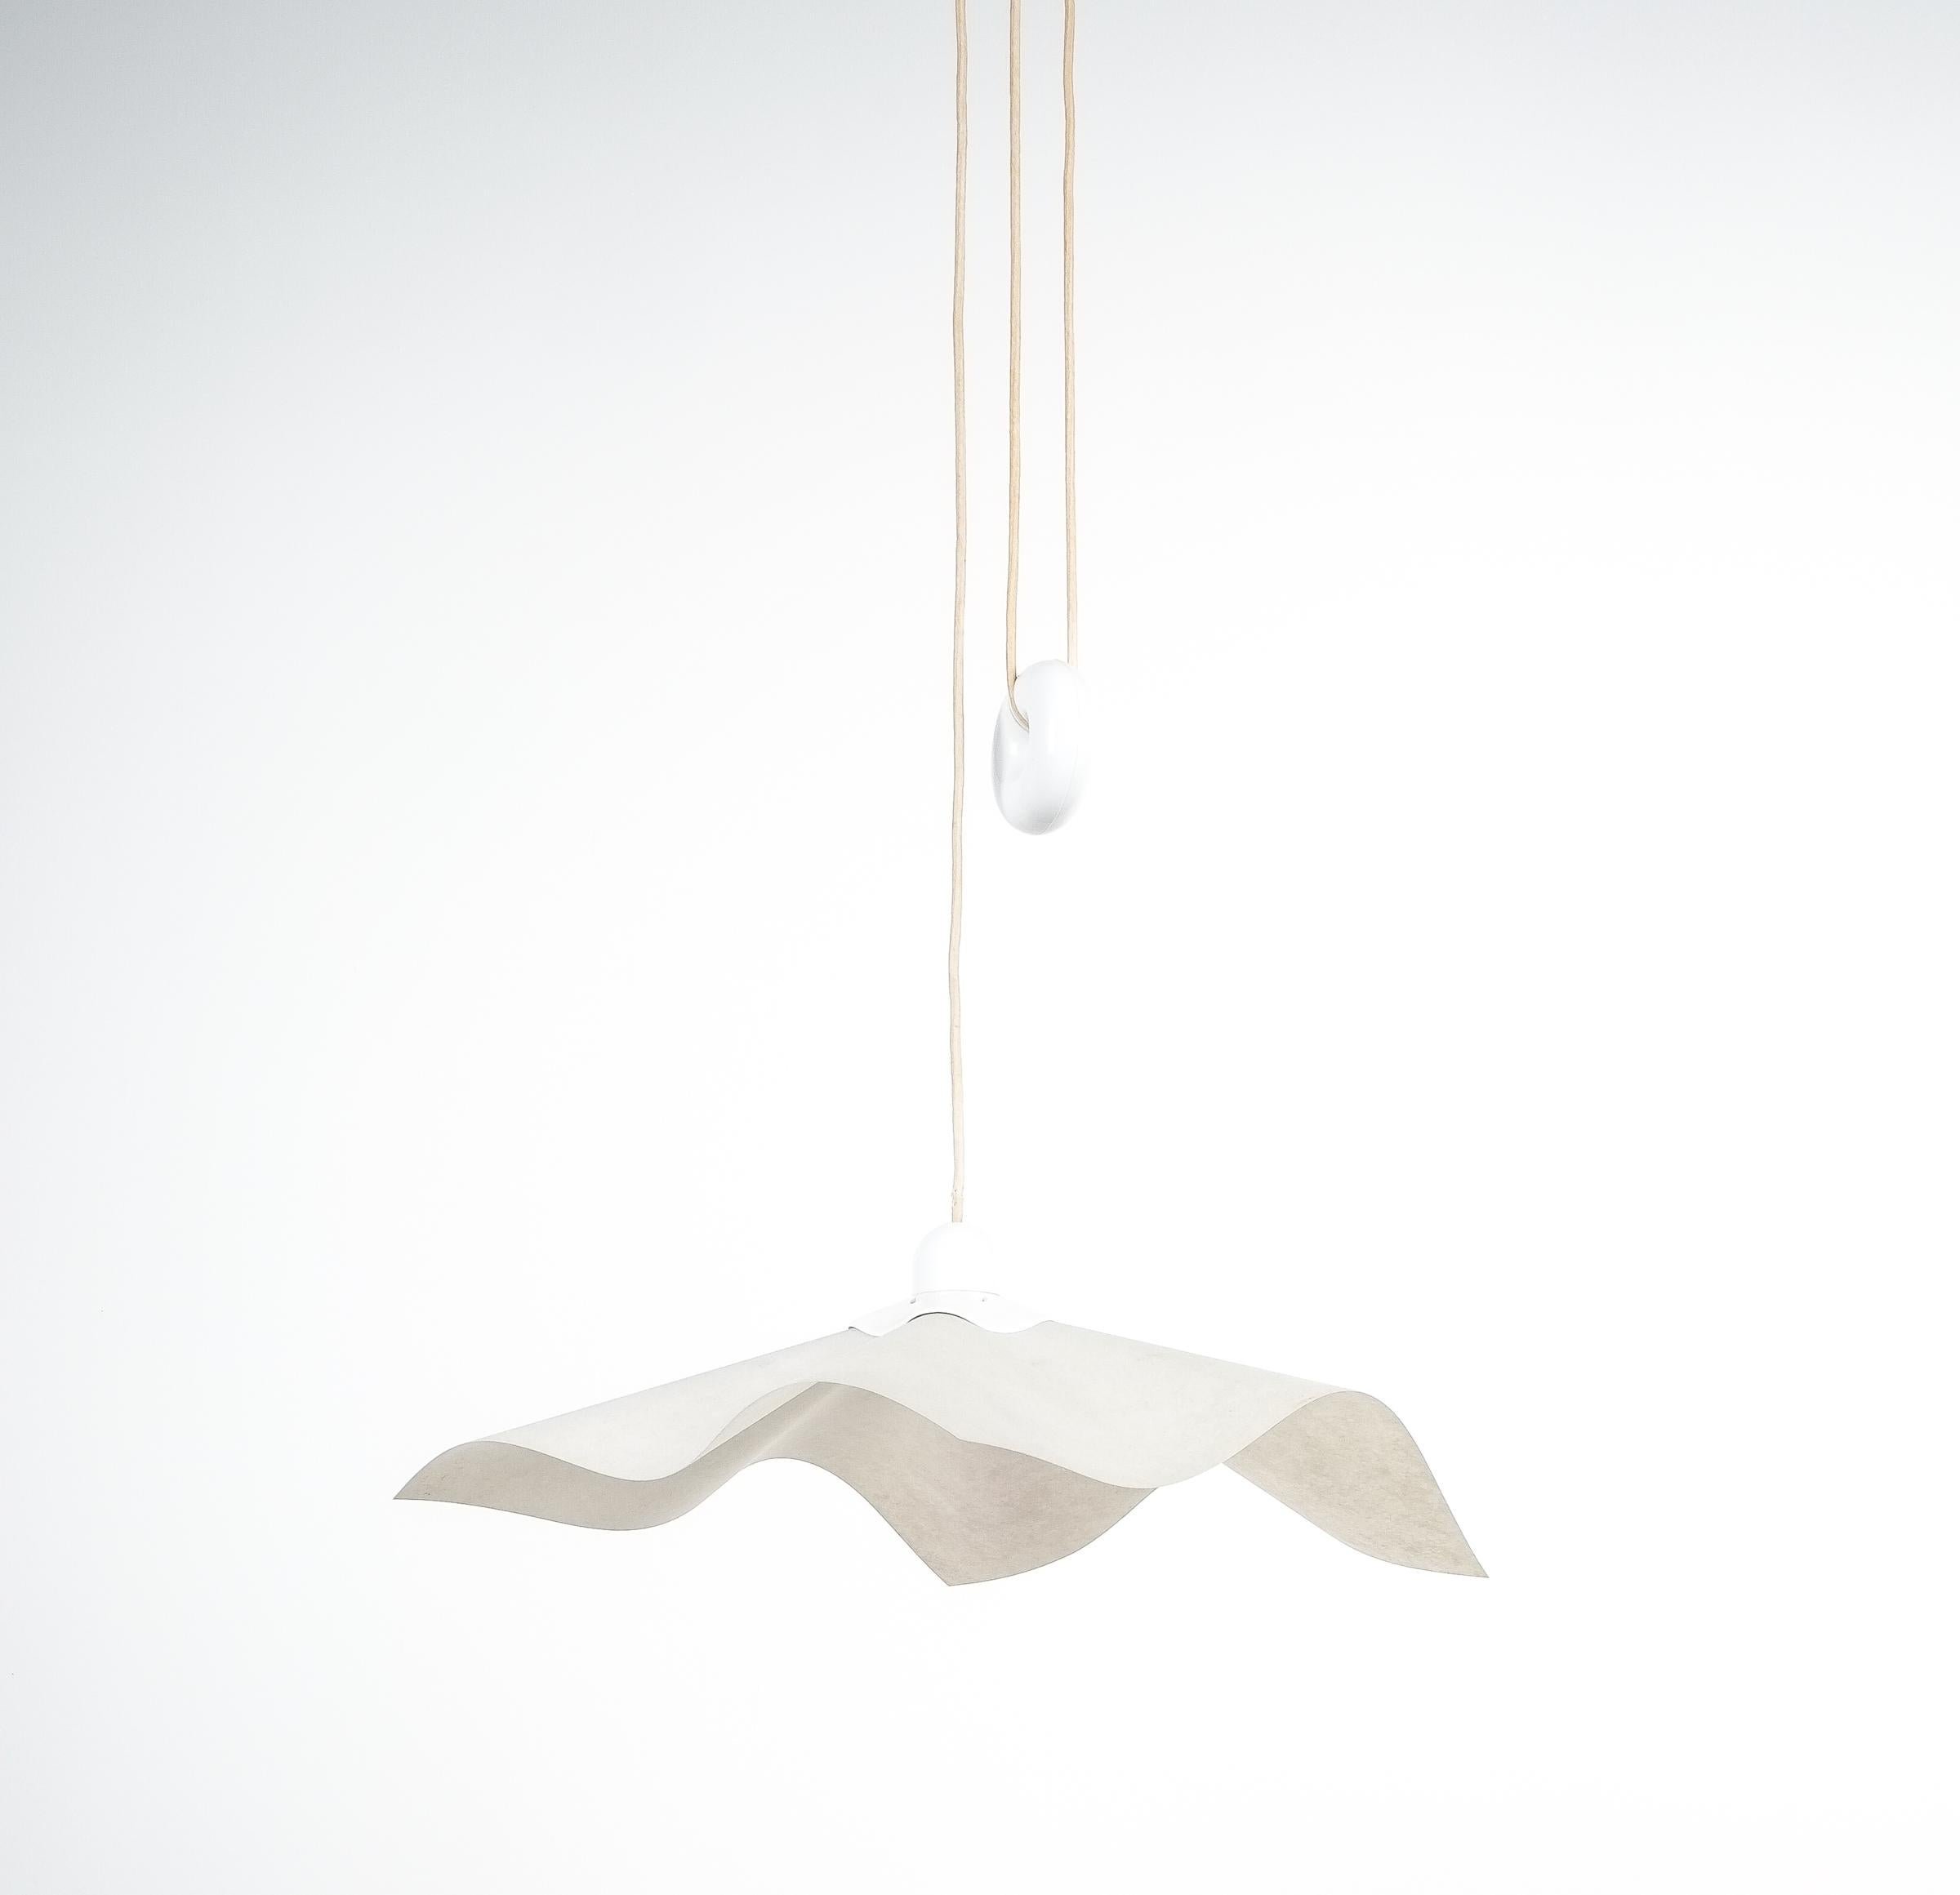 Mario Bellini Counterweight Pendant Lamp Area 50 by Artemide, Italy, 1976 For Sale 2